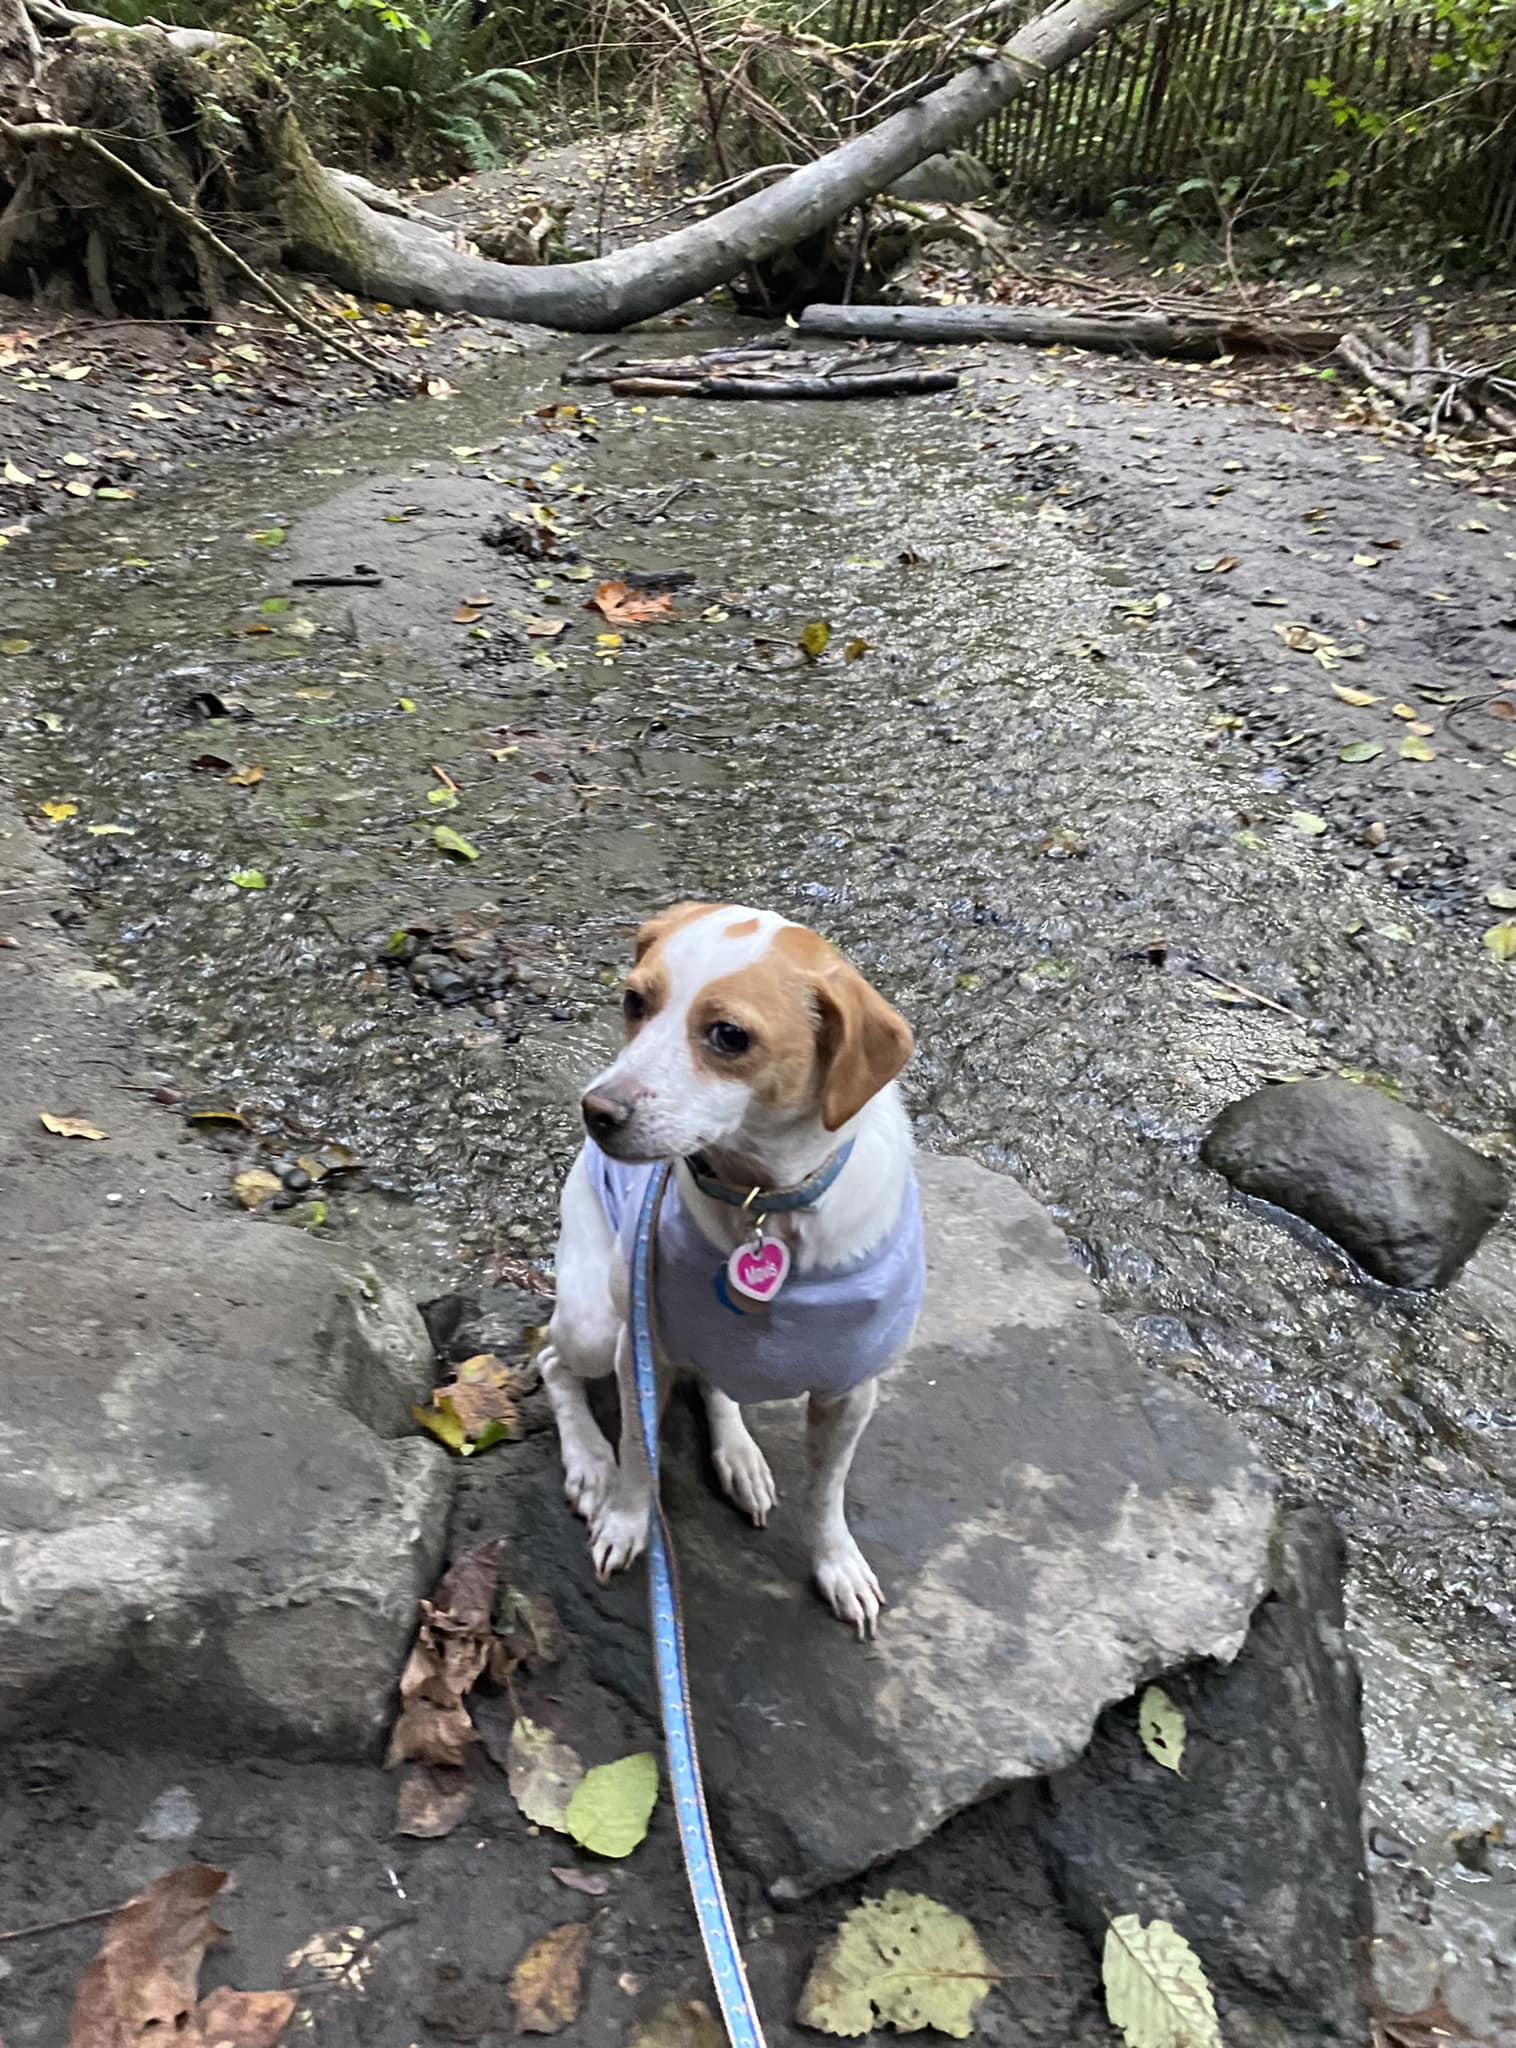 A small white dog sitting on a rock in a forest stream